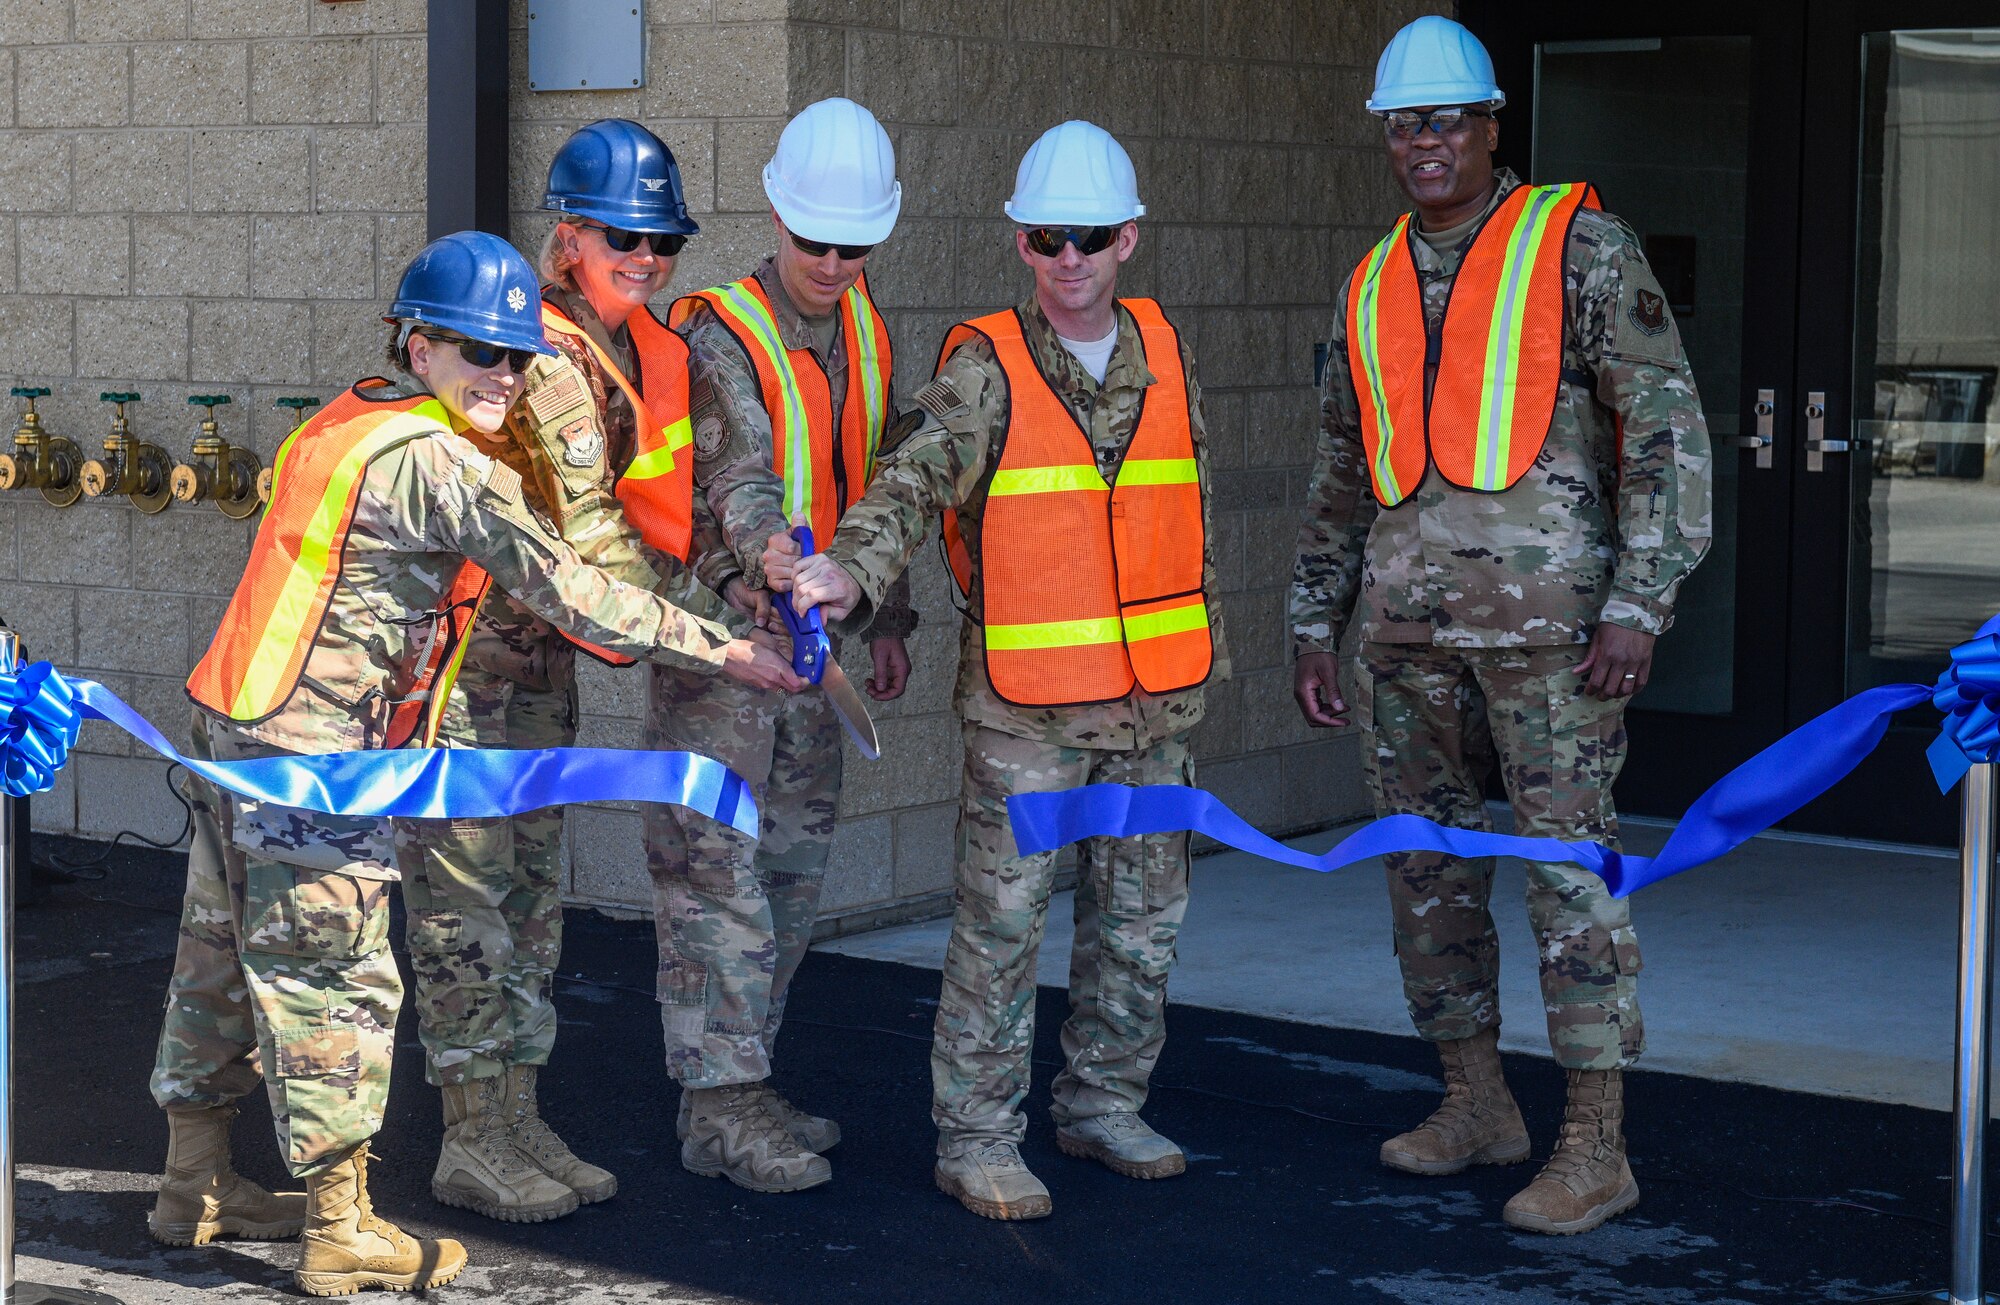 Leadership of the 341st Missile Wing cut a ribbon during the ceremony for the new Tactical Response Force/Helicopter Operations Alert Facility Aug. 4, 2020, at Malmstrom Air Force Base, Mont.